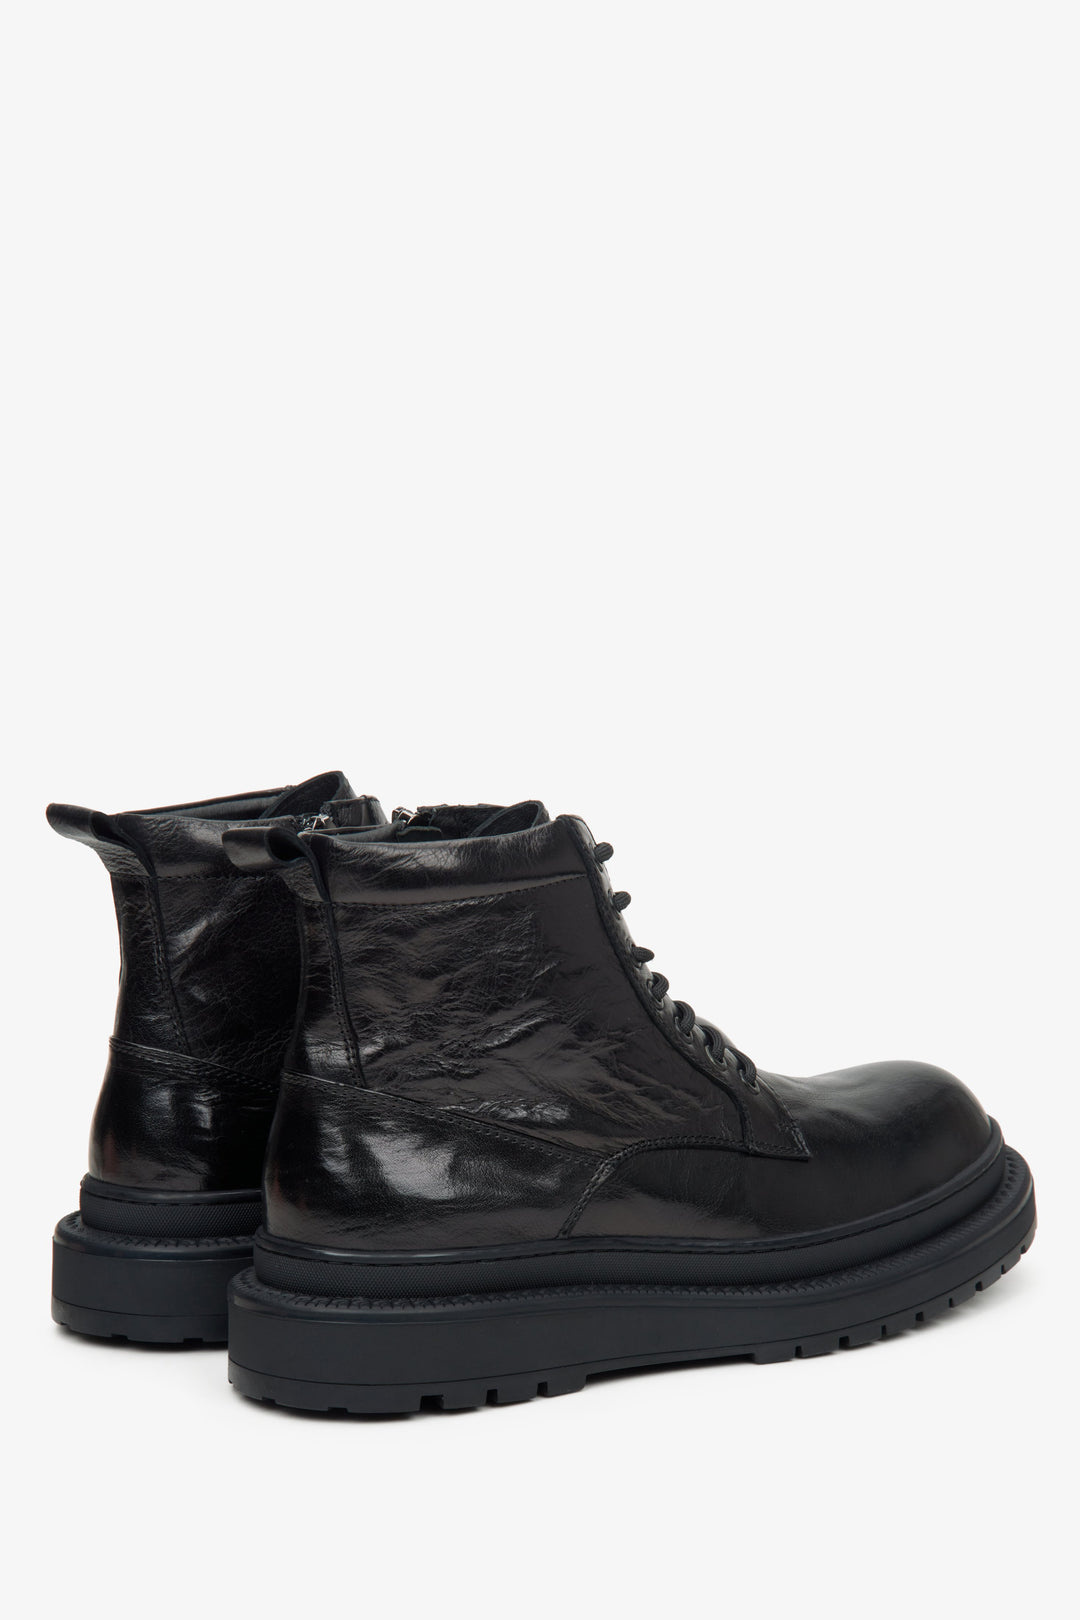 Men's black boots by Estro - heel counters and side profile of the shoe.